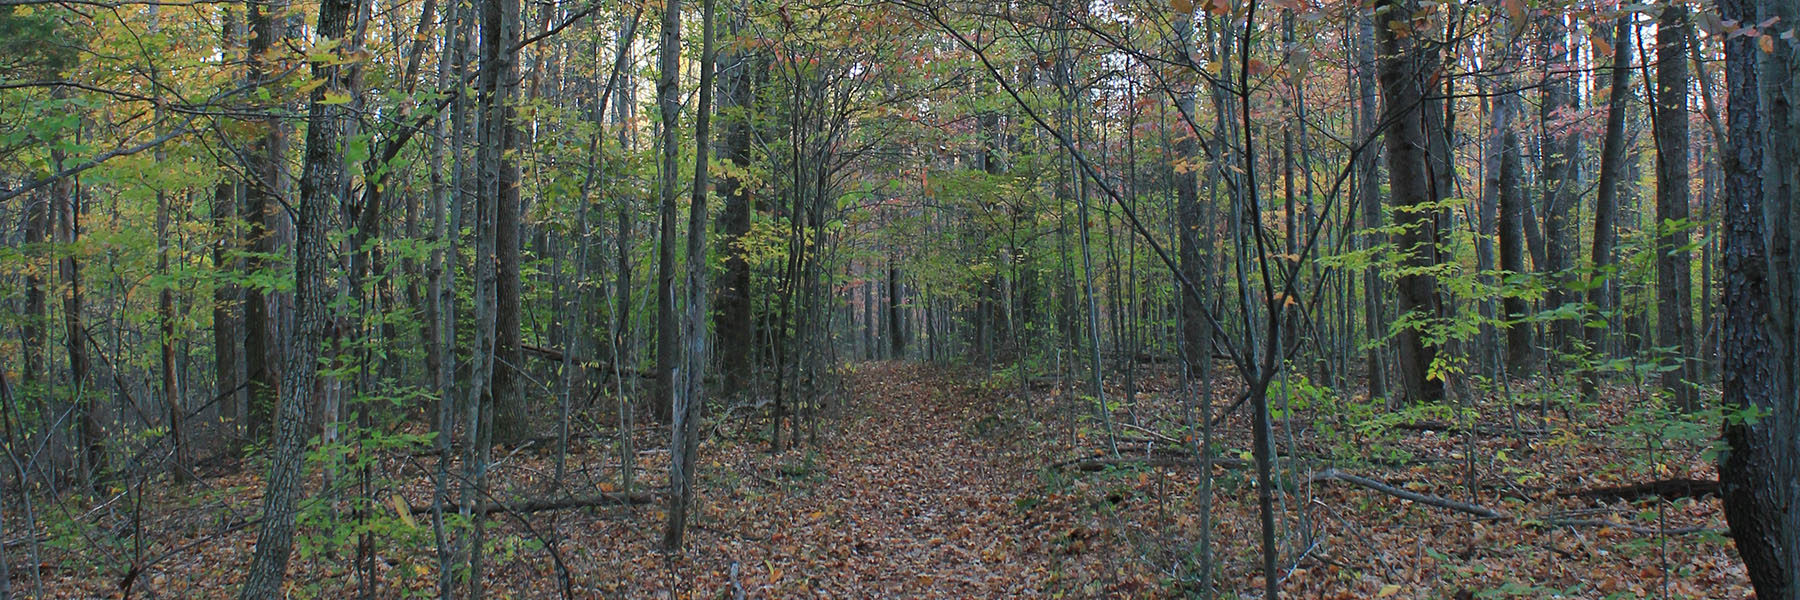 A wooded area in the fall.